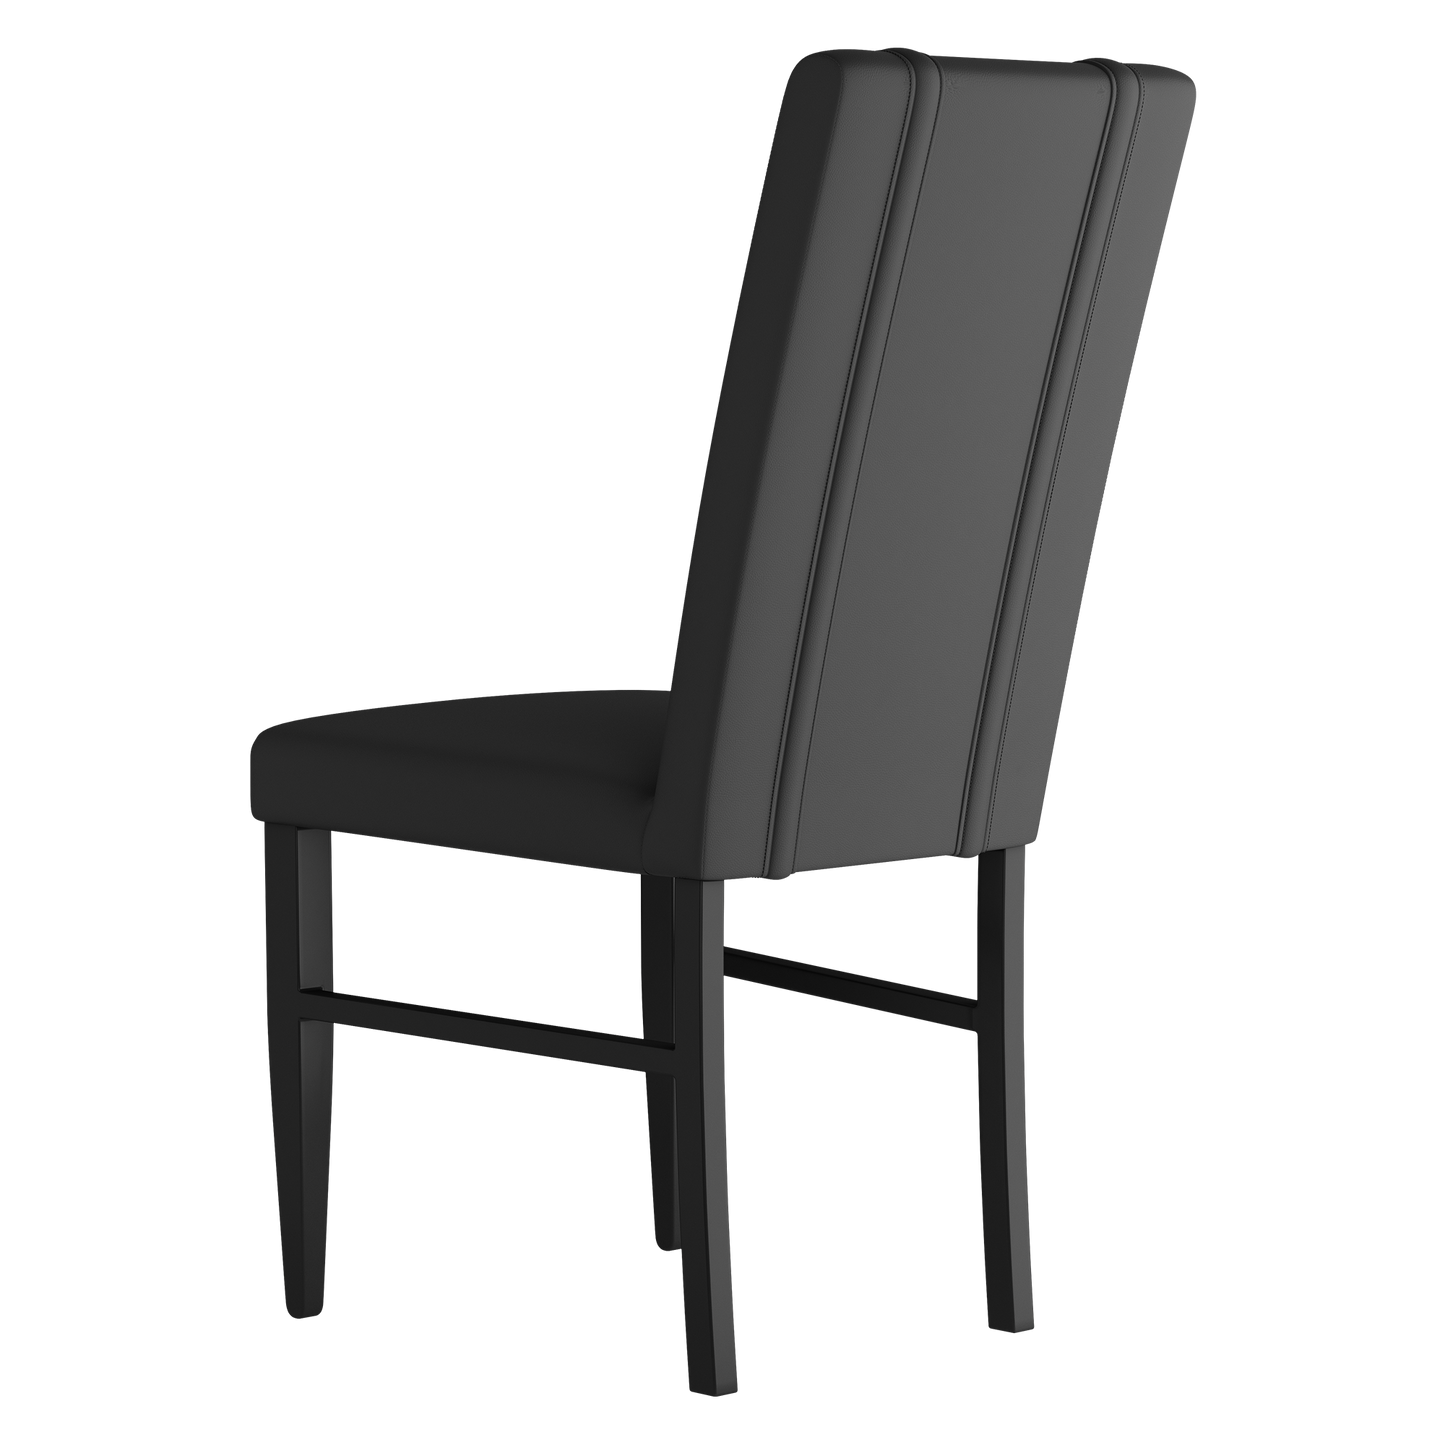 Side Chair 2000 with Northwestern Wildcats Logo Set of 2